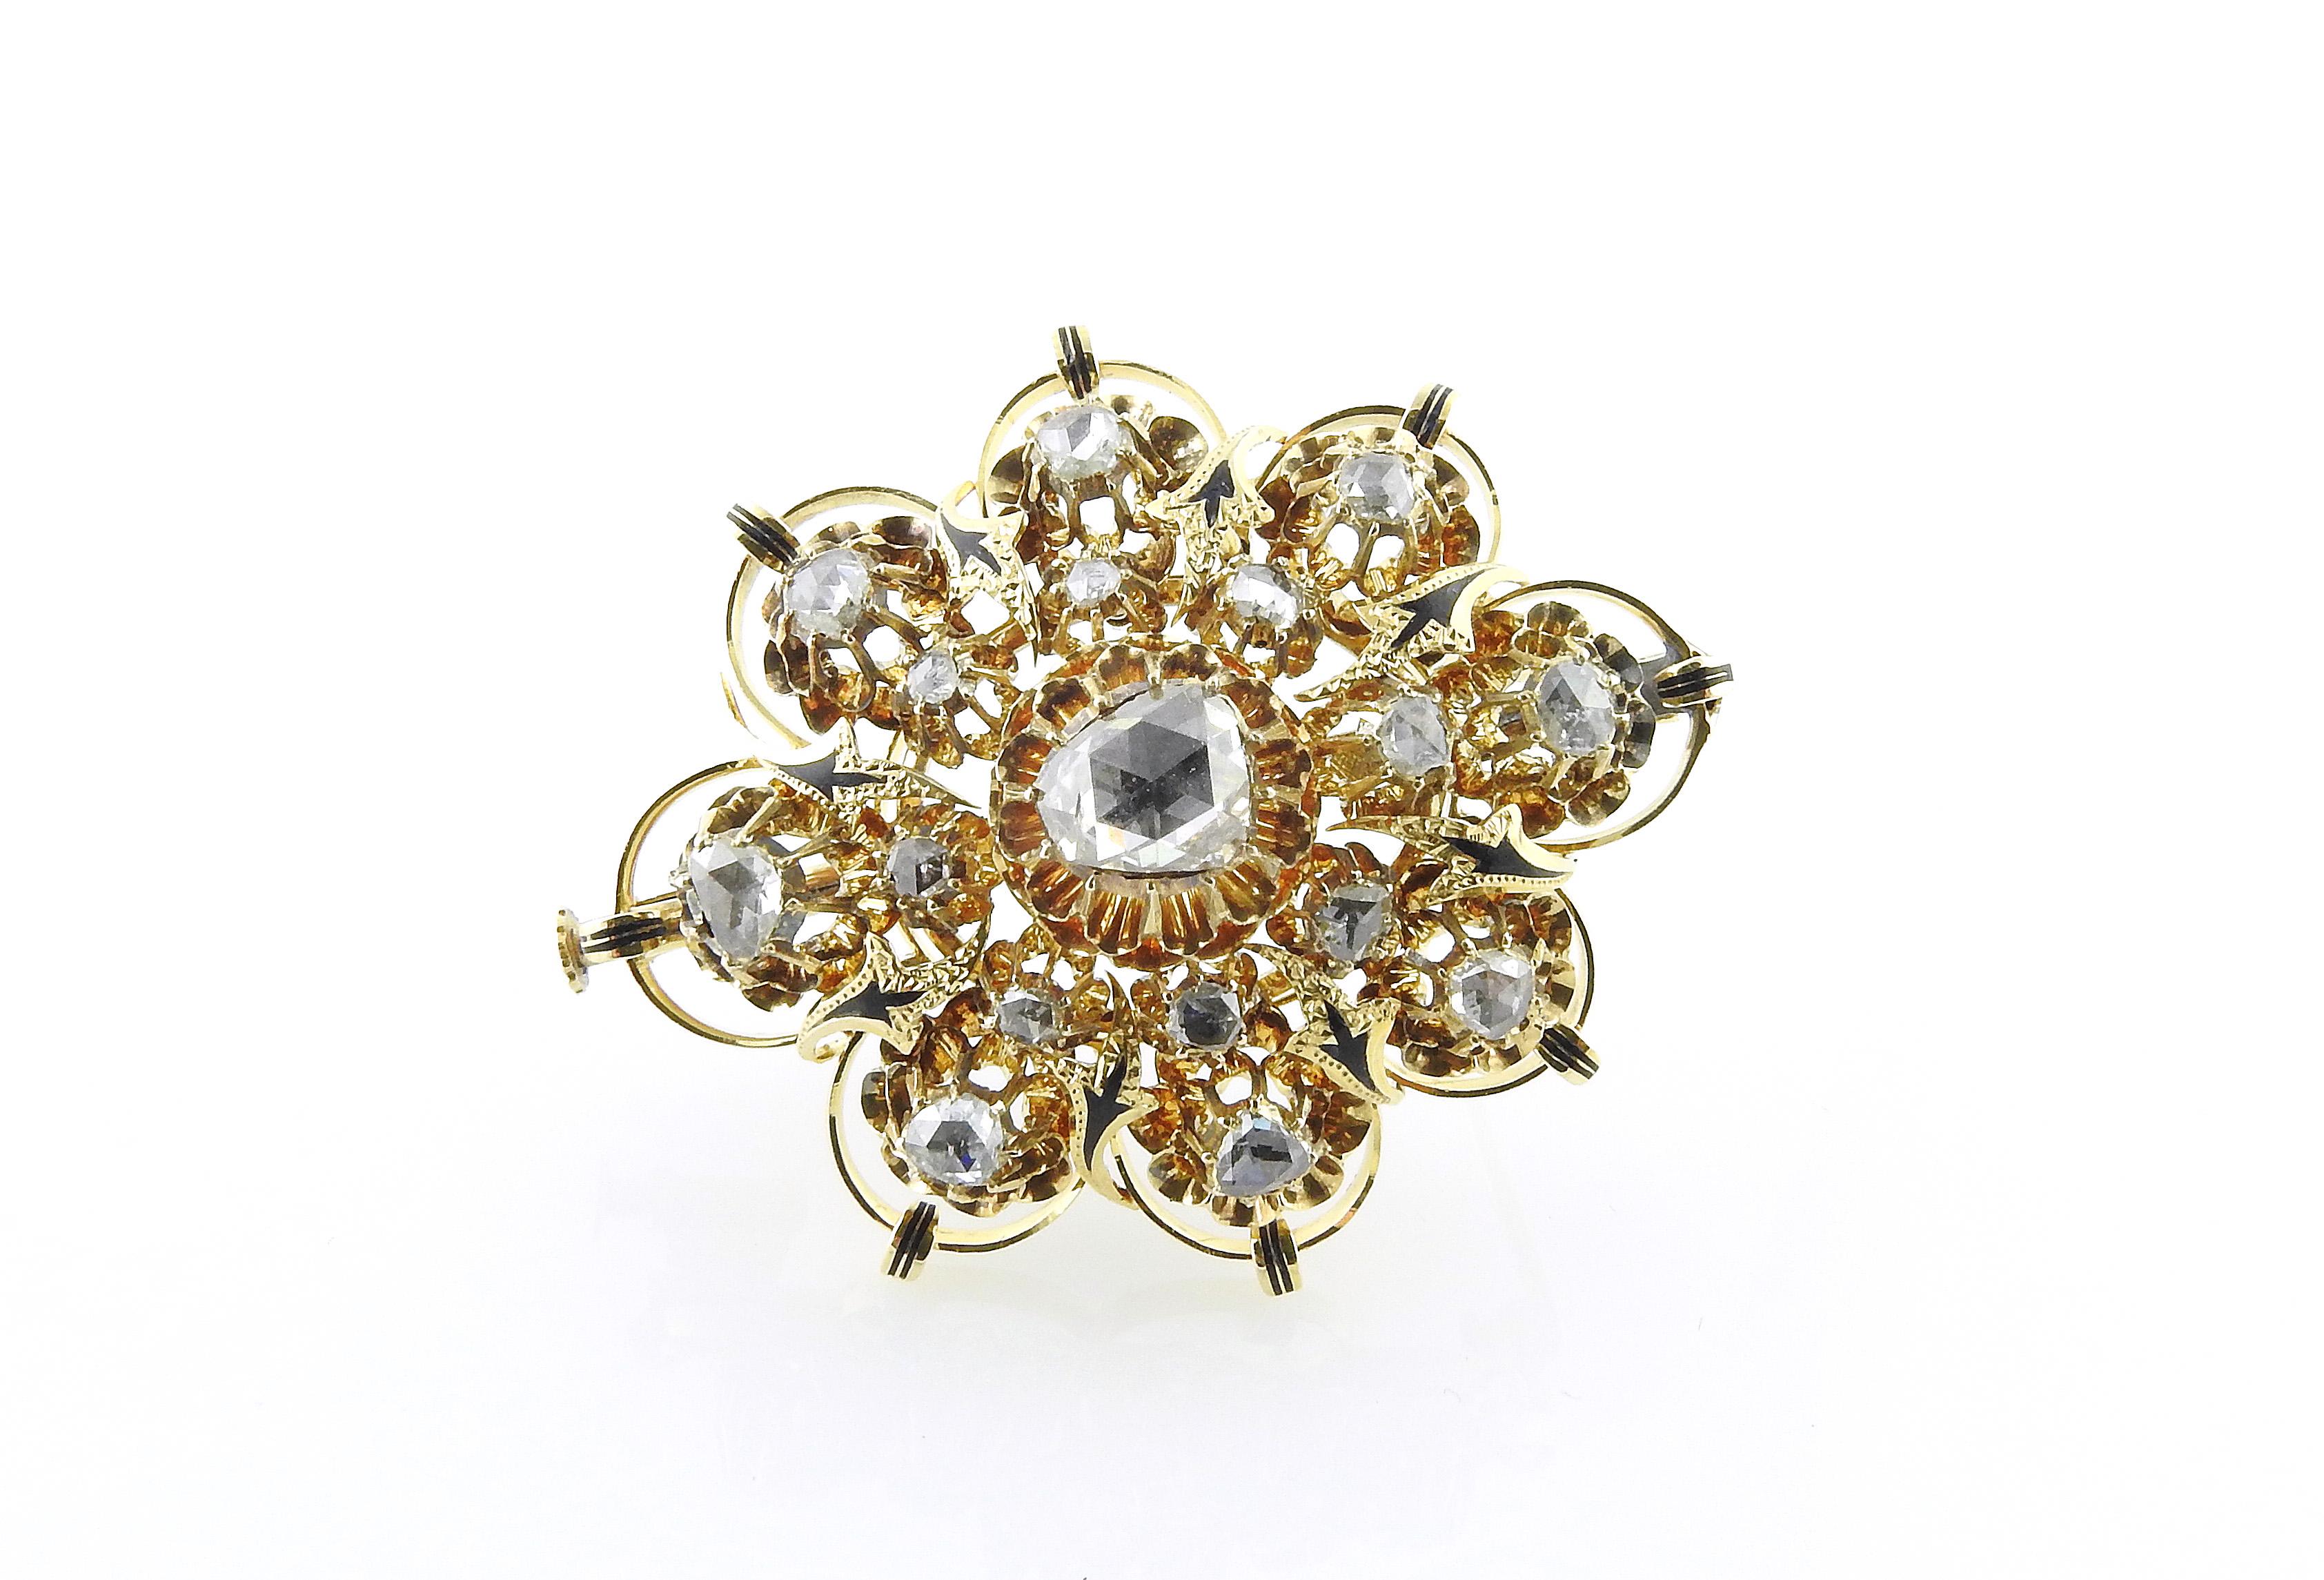 GAI certified 16K yellow gold rose cut diamond brooch

This stunning brooch is set with 17 sparkling rose cut diamonds. 
Total diamond carat weight: 3.25 cts
Clarity: SI - I
Color : I (Pepper - Salt color)

The brooch is approx. 45mm x 39mm

15.1 g